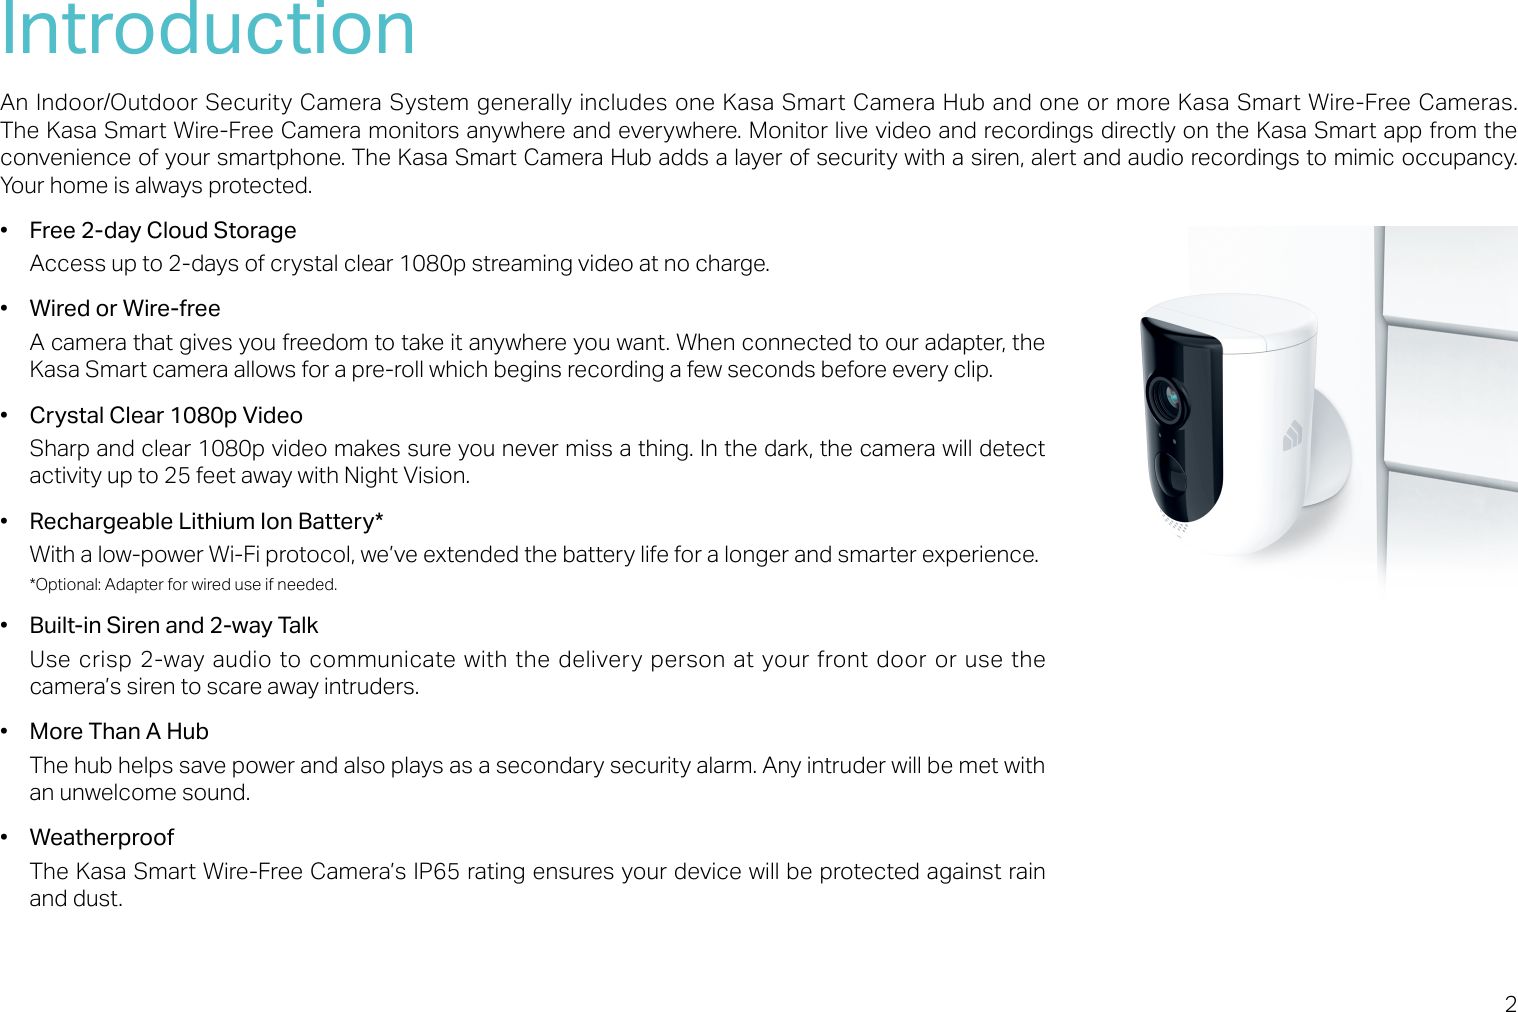 2IntroductionAn Indoor/Outdoor Security Camera System generally includes one Kasa Smart Camera Hub and one or more Kasa Smart Wire-Free Cameras. The Kasa Smart Wire-Free Camera monitors anywhere and everywhere. Monitor live video and recordings directly on the Kasa Smart app from the convenience of your smartphone. The Kasa Smart Camera Hub adds a layer of security with a siren, alert and audio recordings to mimic occupancy. Your home is always protected.•  Free 2-day Cloud StorageAccess up to 2-days of crystal clear 1080p streaming video at no charge.•  Wired or Wire-freeA camera that gives you freedom to take it anywhere you want. When connected to our adapter, the Kasa Smart camera allows for a pre-roll which begins recording a few seconds before every clip.•  Crystal Clear 1080p VideoSharp and clear 1080p video makes sure you never miss a thing. In the dark, the camera will detect activity up to 25 feet away with Night Vision.•  Rechargeable Lithium Ion Battery*With a low-power Wi-Fi protocol, we’ve extended the battery life for a longer and smarter experience.*Optional: Adapter for wired use if needed.•  Built-in Siren and 2-way TalkUse crisp 2-way audio to communicate with the  delivery person at your front door or use the camera’s siren to scare away intruders.•  More Than A HubThe hub helps save power and also plays as a secondary security alarm. Any intruder will be met with an unwelcome sound.•  Weatherproof The Kasa Smart Wire-Free Camera’s IP65 rating ensures your device will be protected against rain and dust.